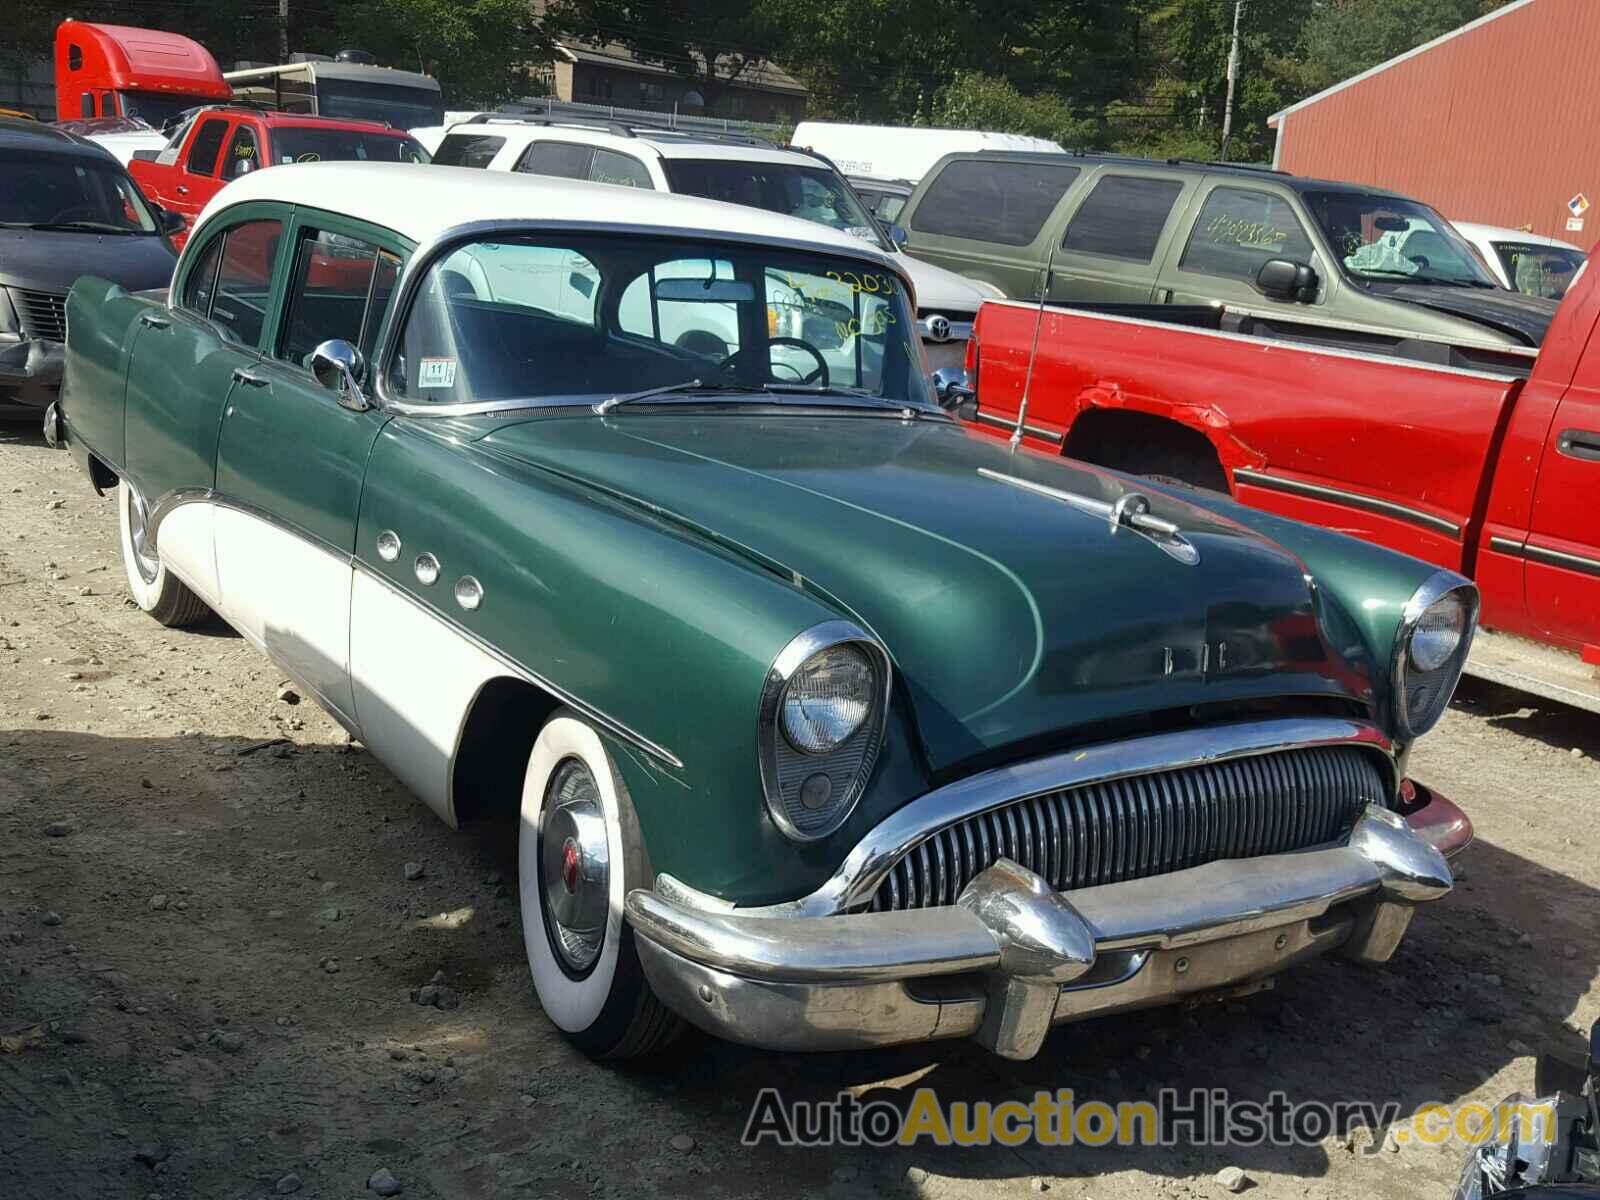 1954 BUICK SPECIA, 4A3049634